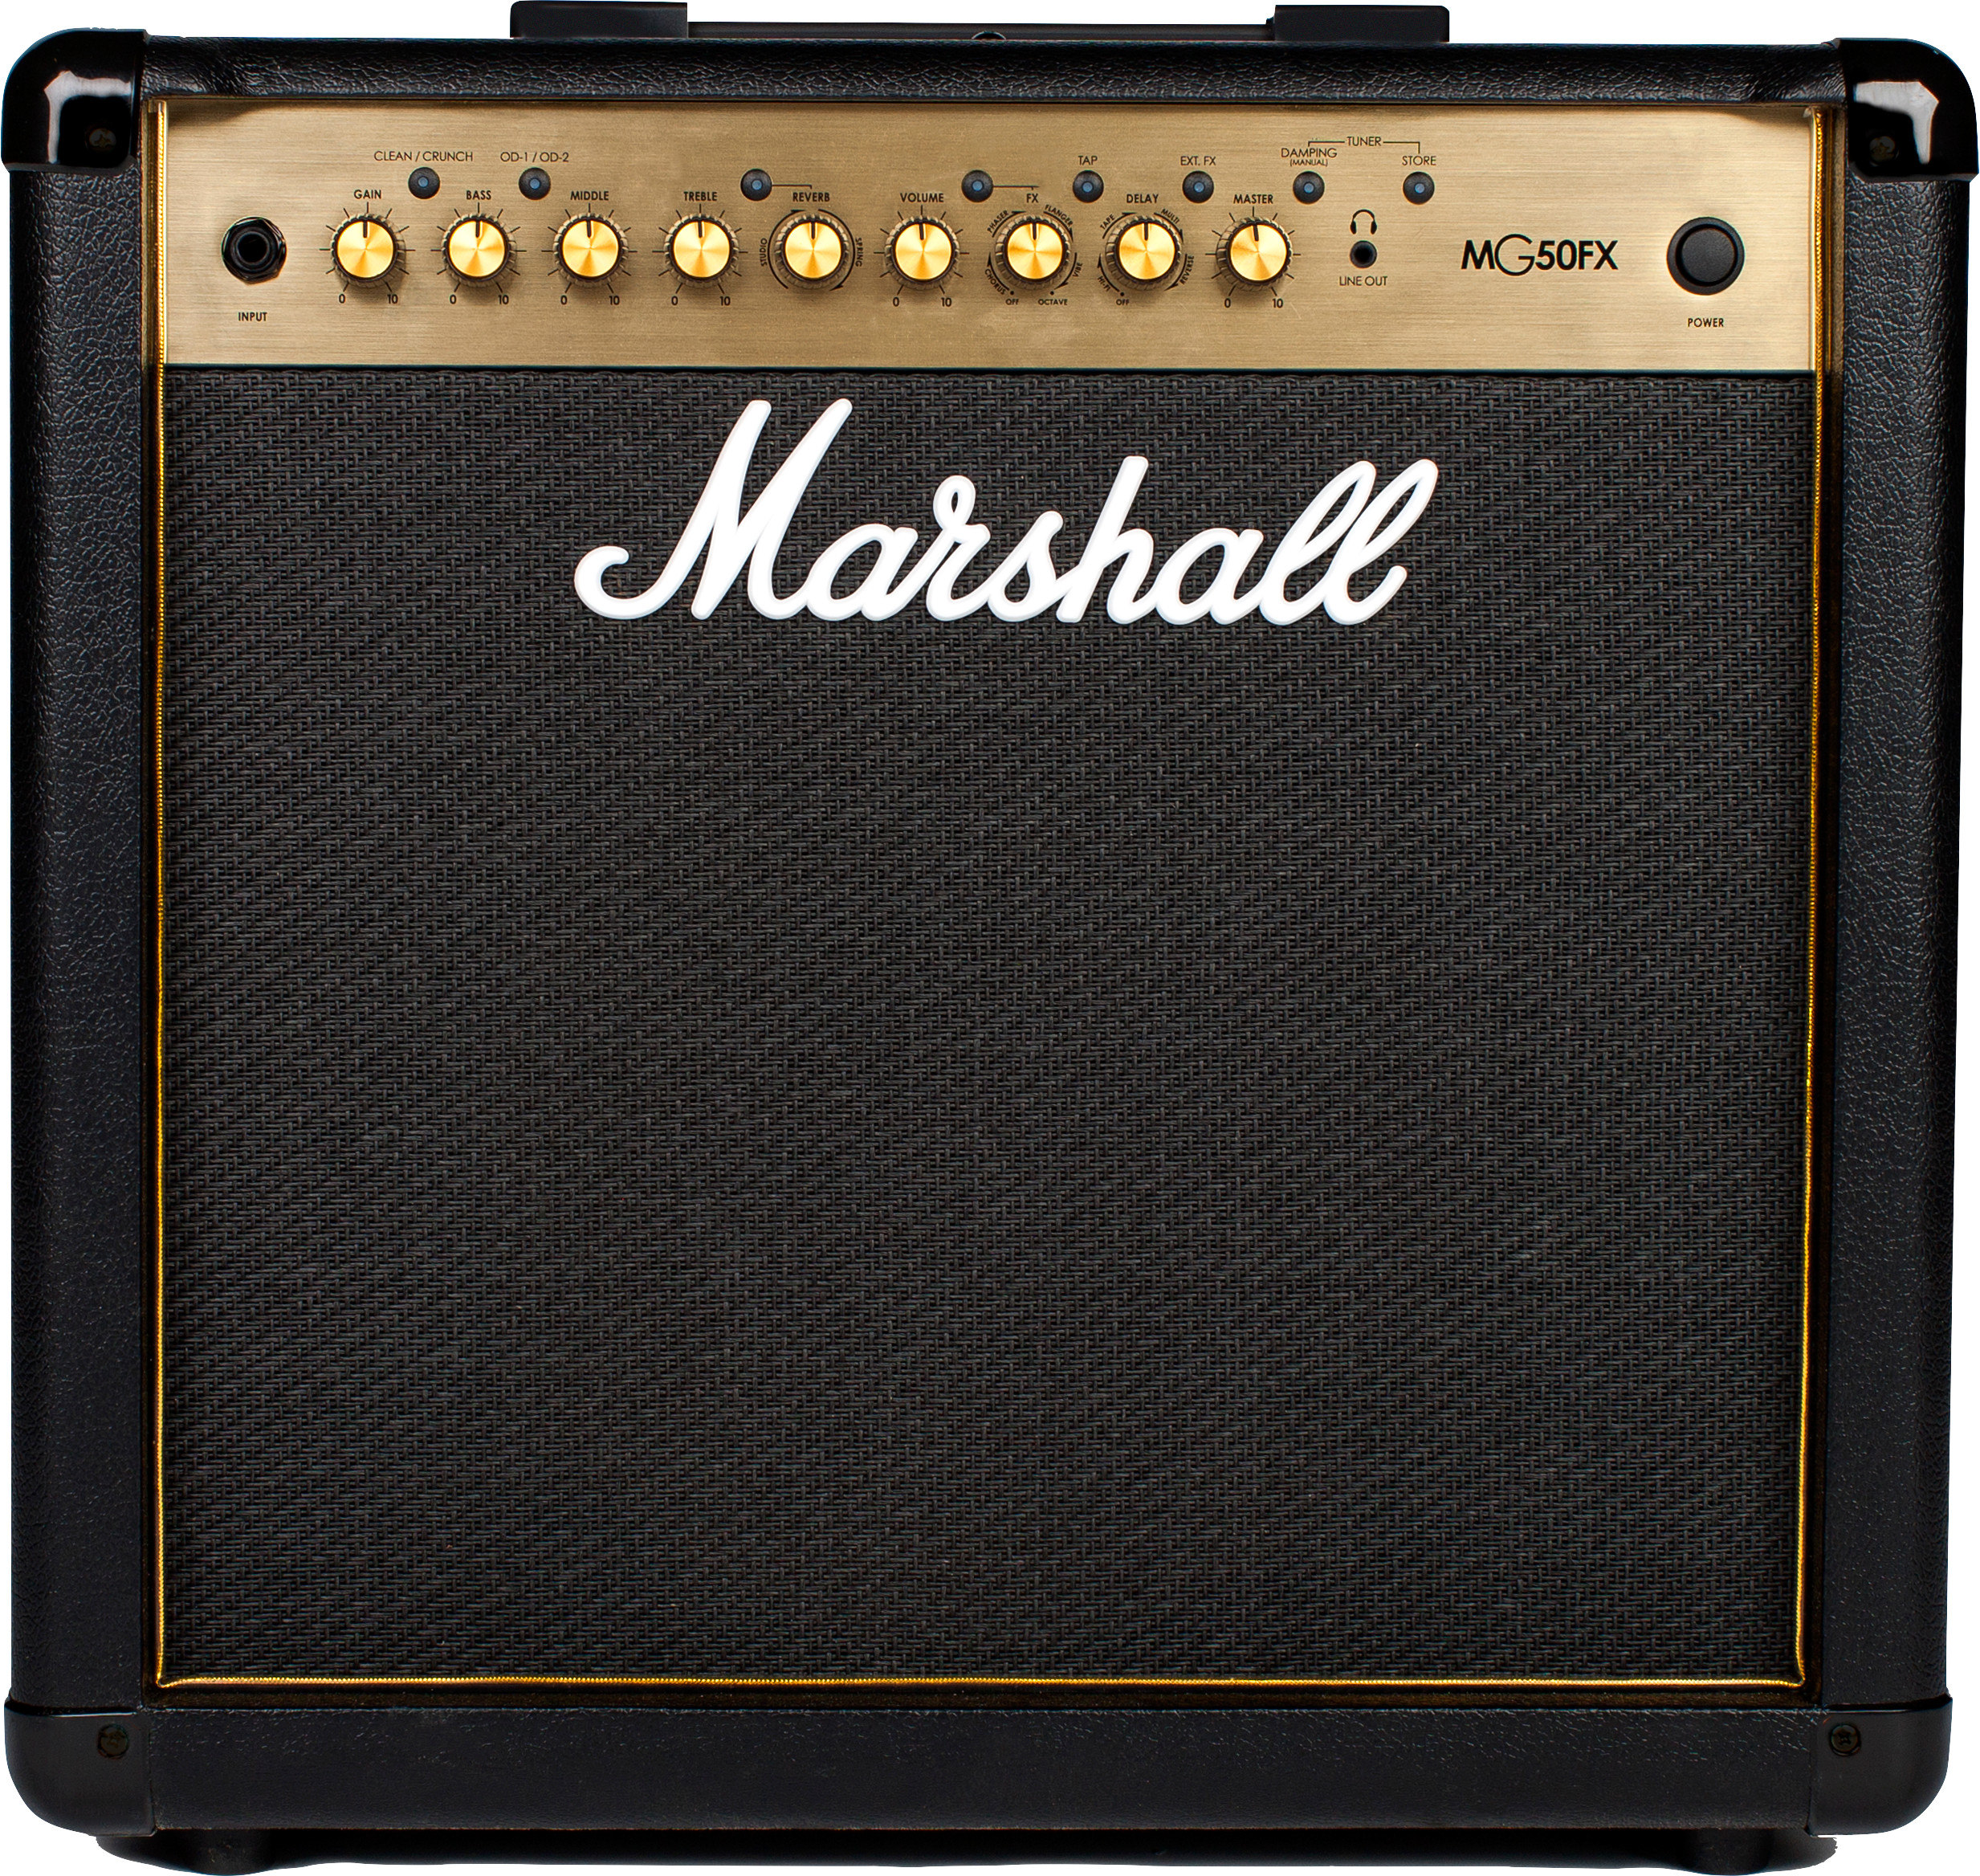 Marshall Mg50gfx Gold Combo 50 W - Electric guitar combo amp - Variation 1